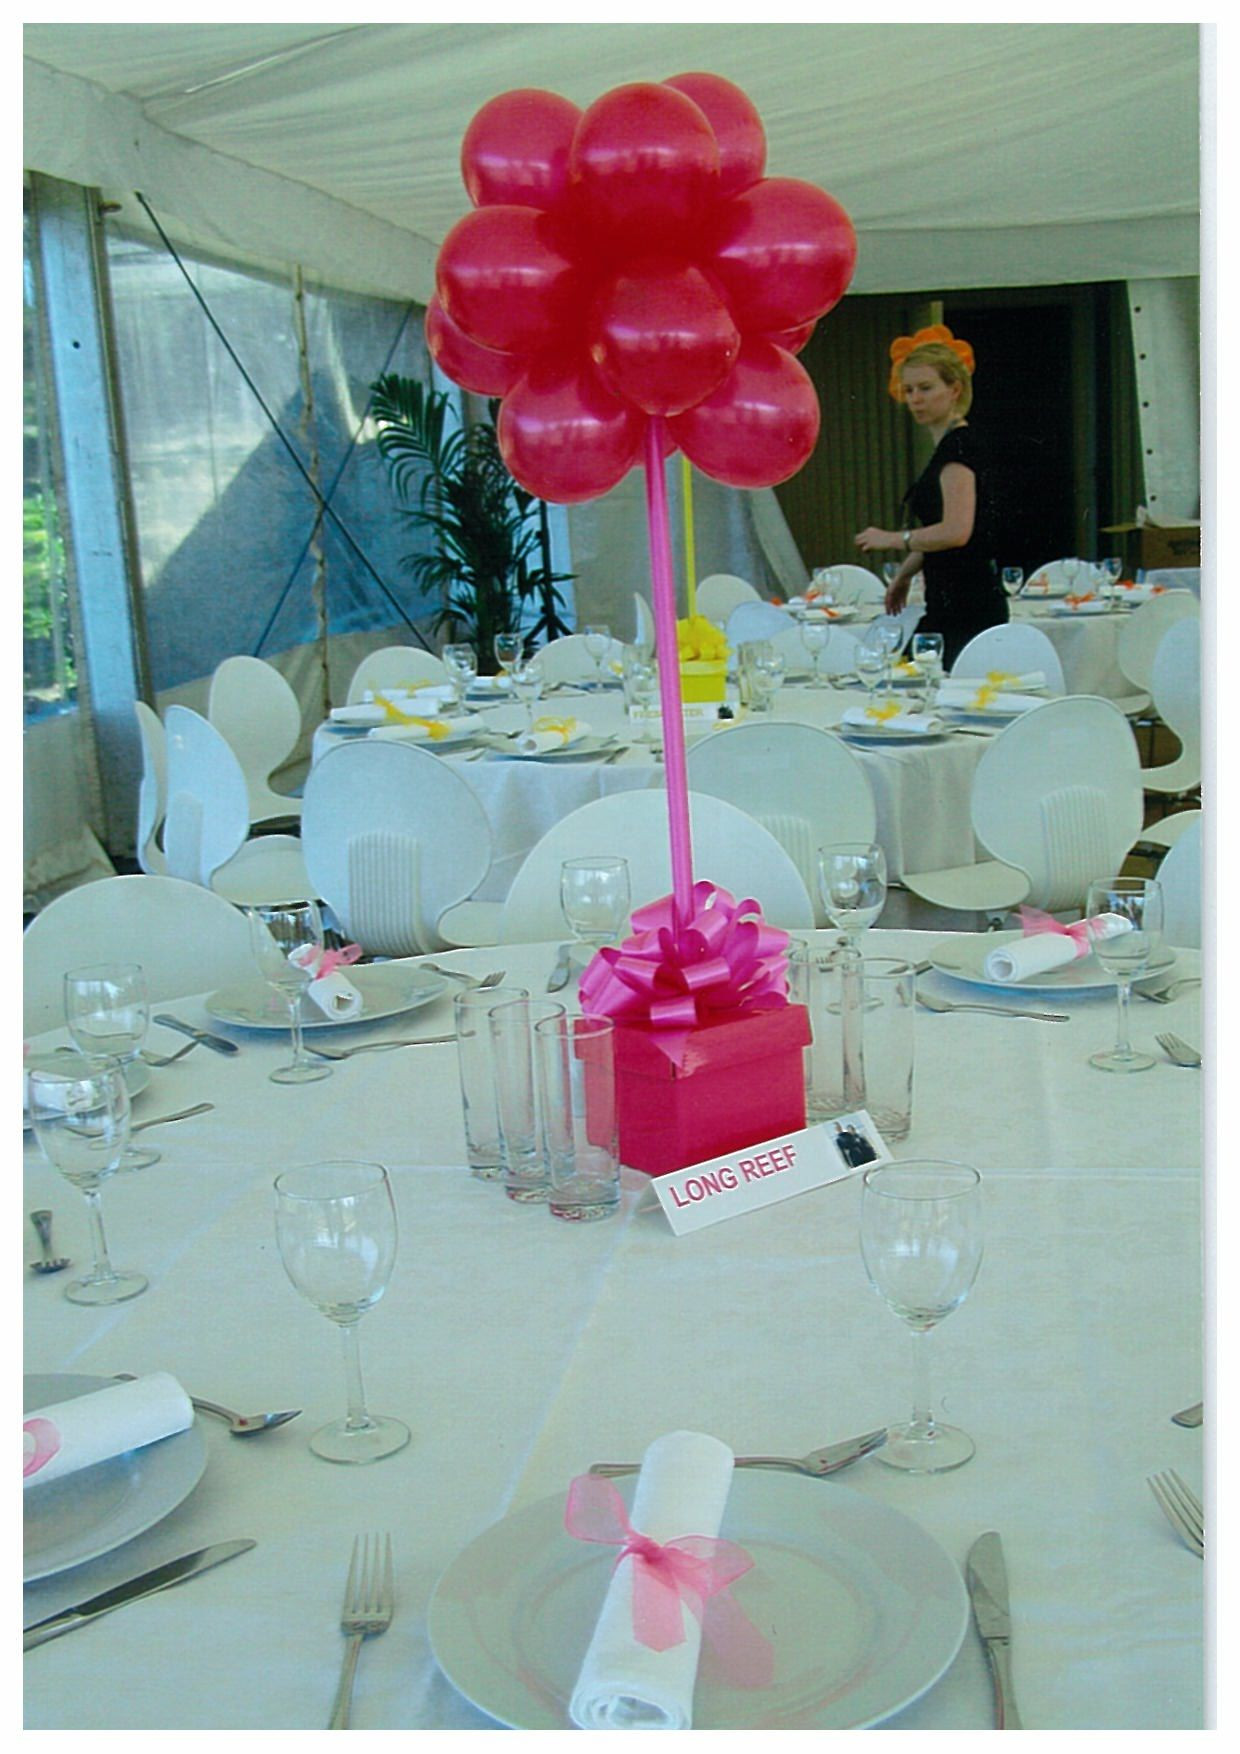 Birthday Party Table Decorations Centerpieces
 Balloon Table Centerpieces